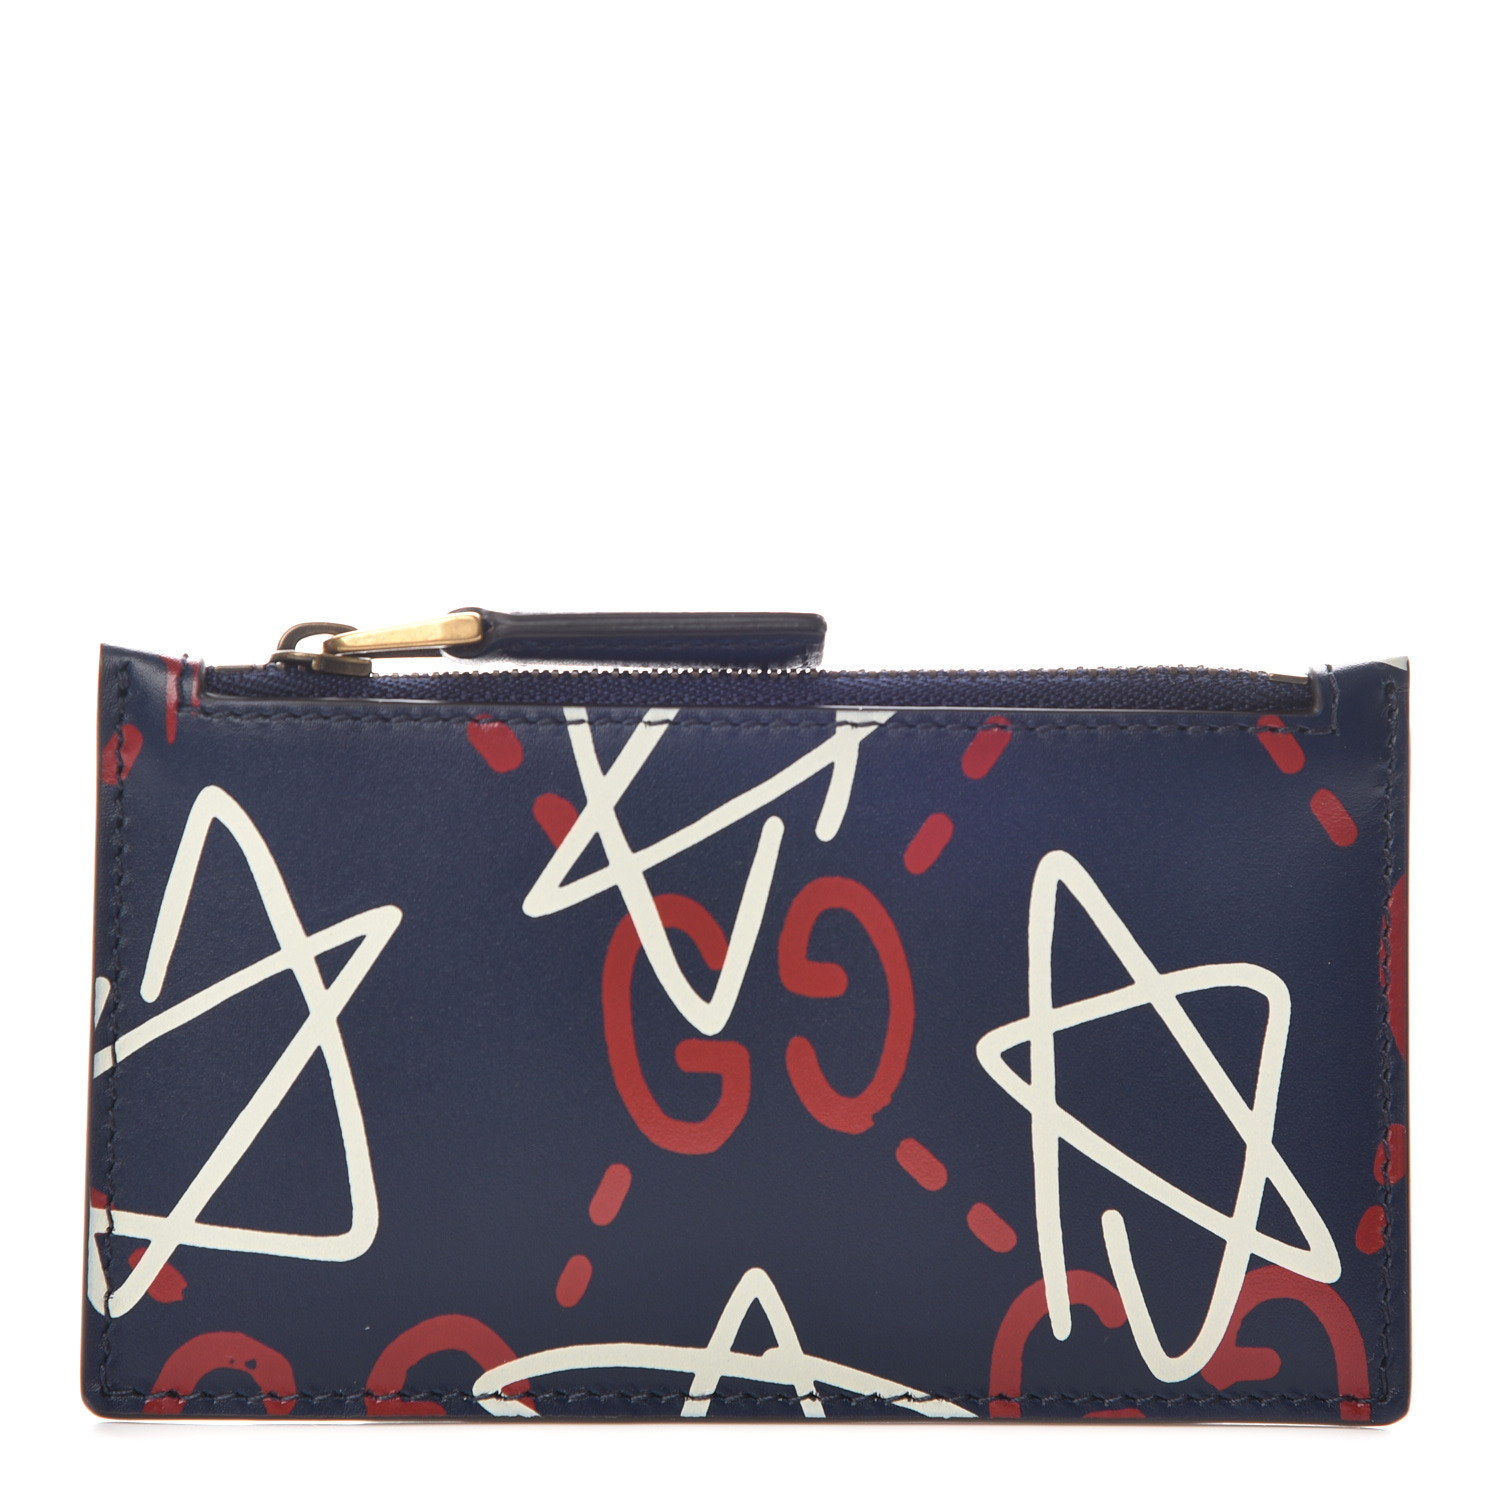 GucciGhost Coin Case Card Holder Blue Agata Hibiscus Red 405541 | FASHIONPHILE